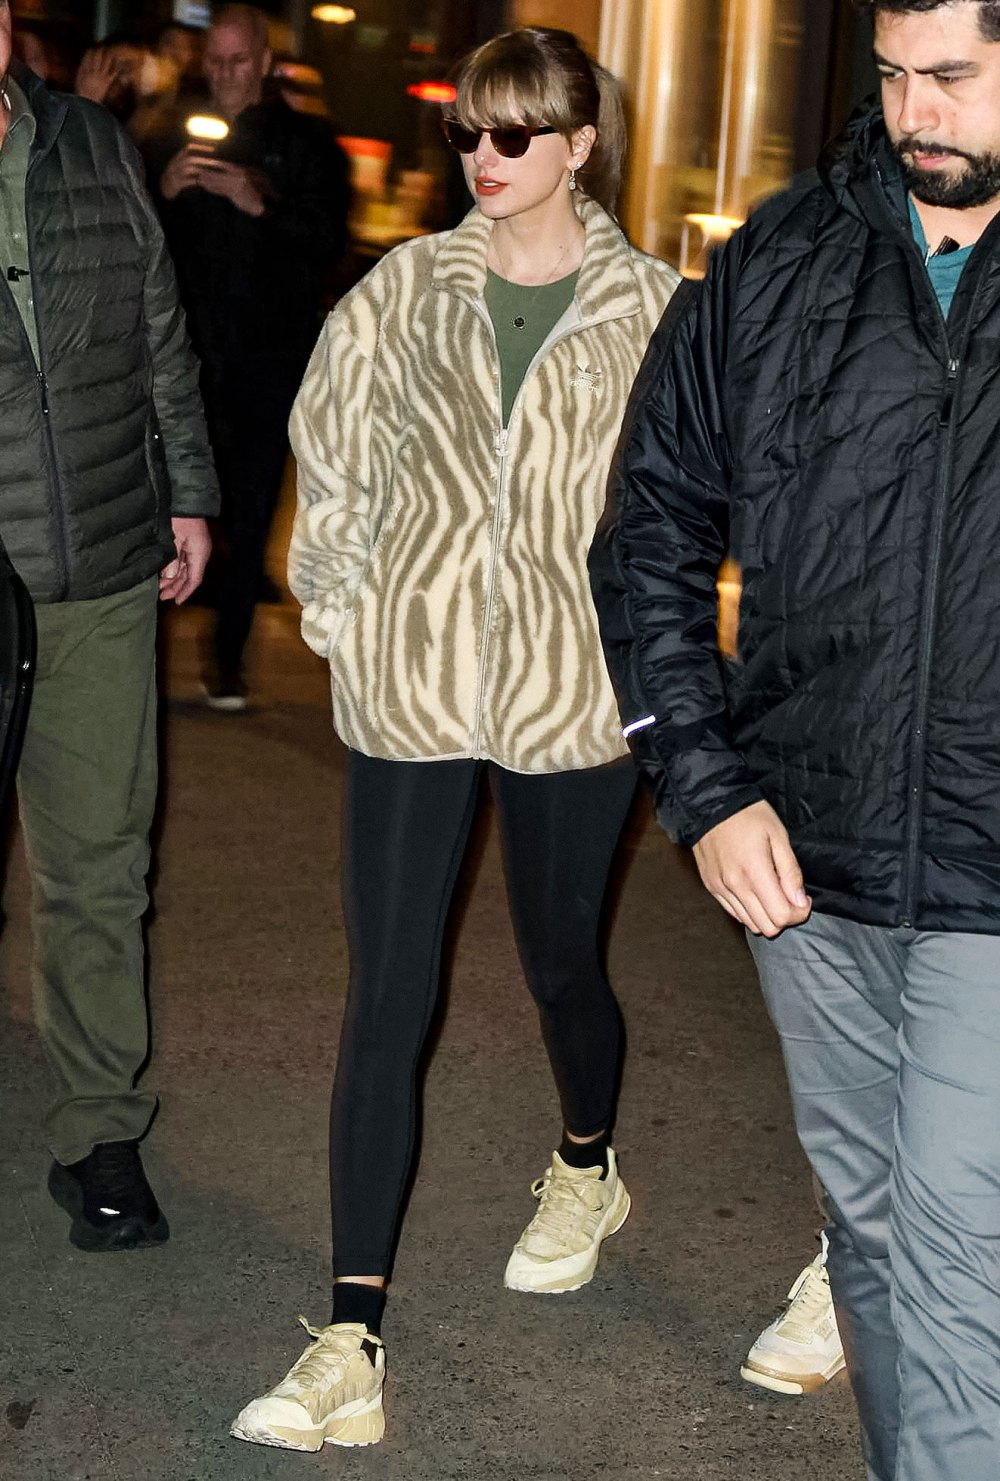 Taylor Swift Is Casually Chic in Zebra-Print Fuzzy Jacket During New York City Outing